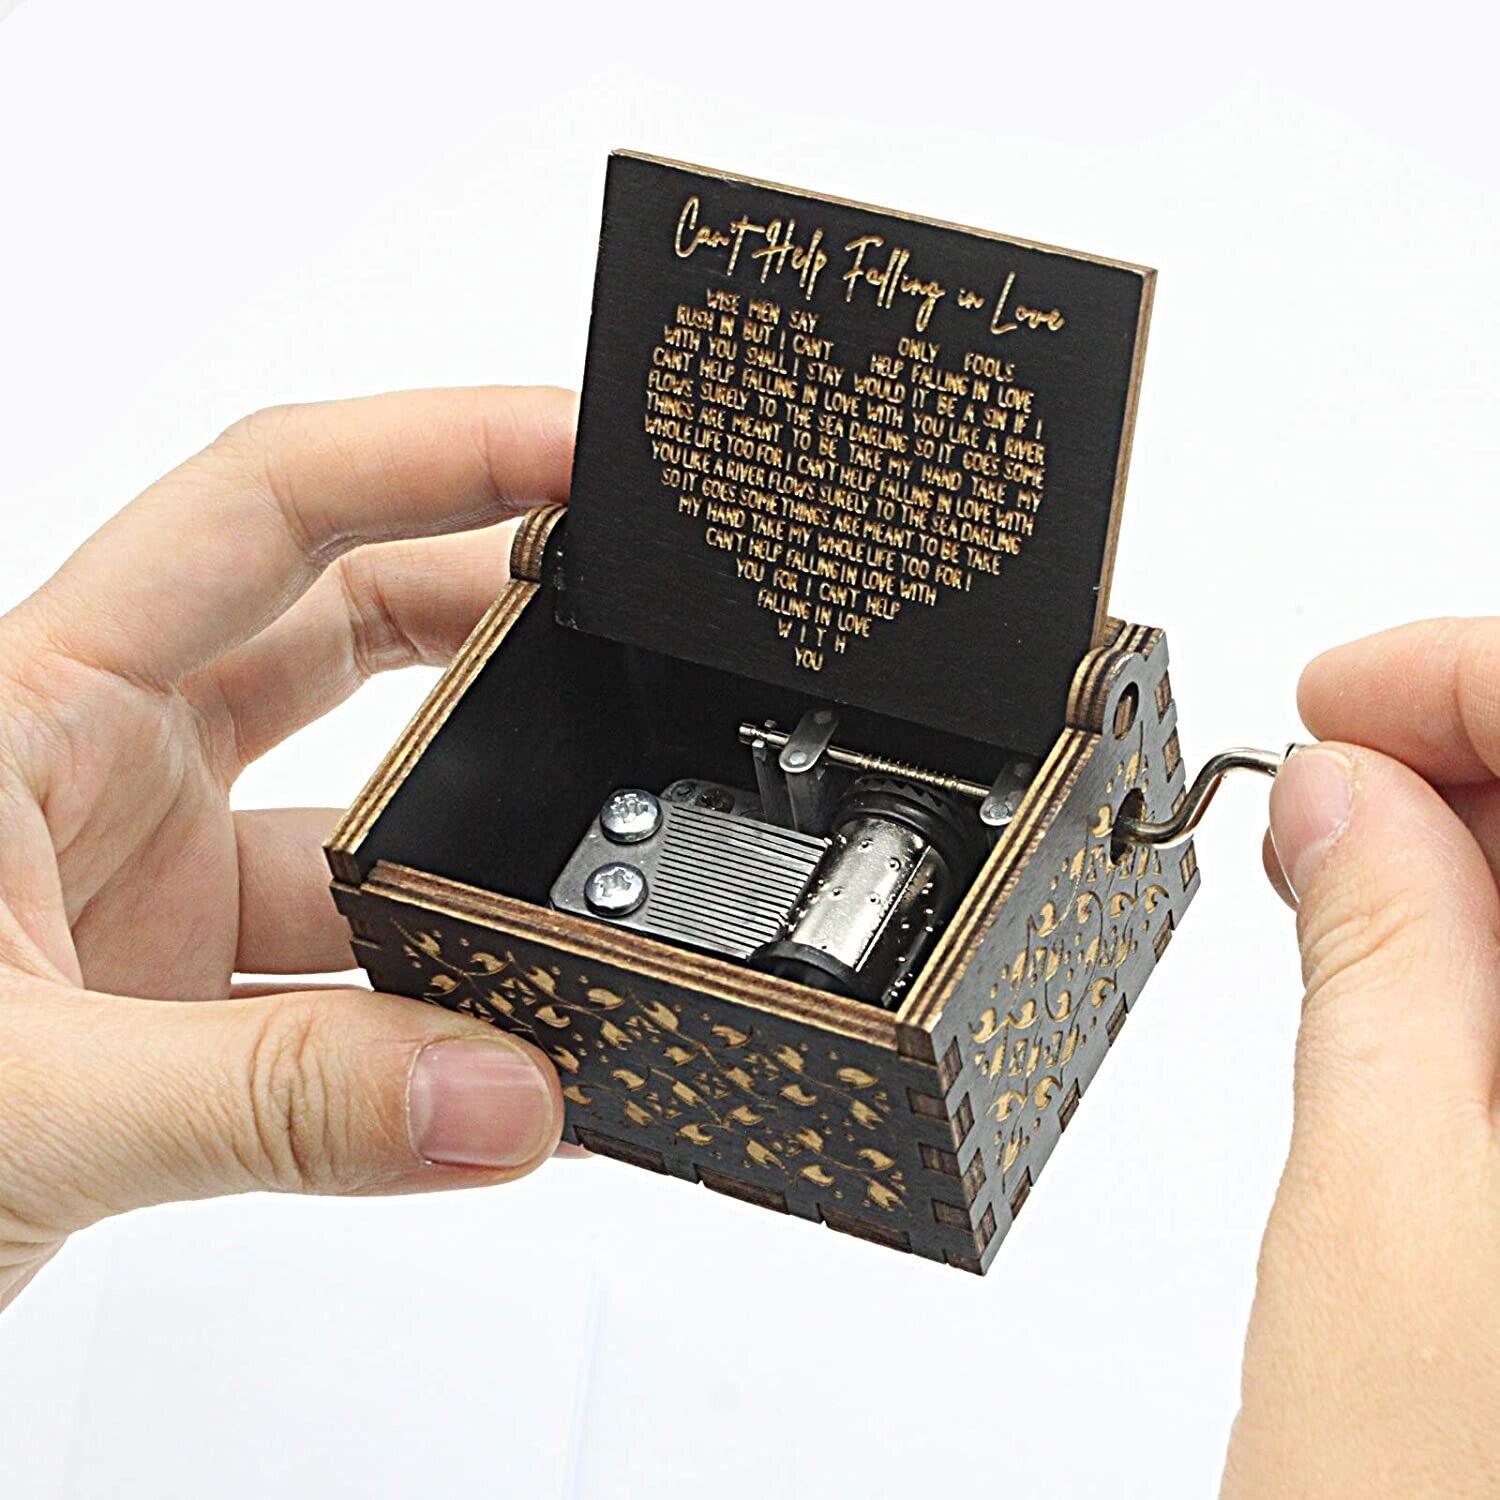 Music Box - Gifts for Lover, Can't Help Falling in Love Wood Music Box